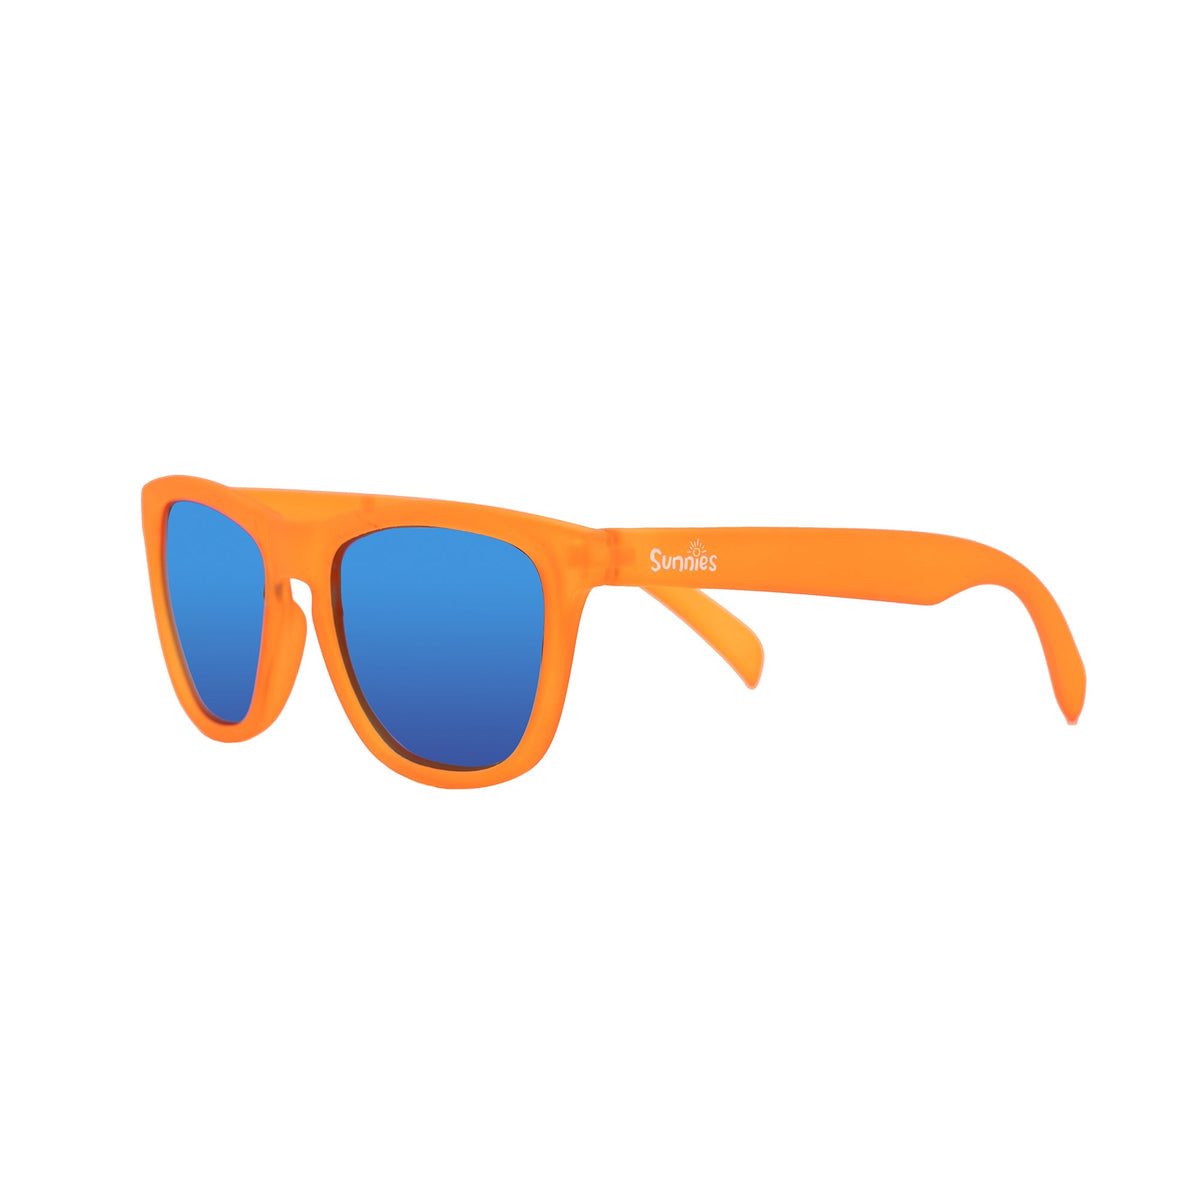 Orange polarized kids sunglasses by Sunnies with reflective blue lenses and an anti-slip material.